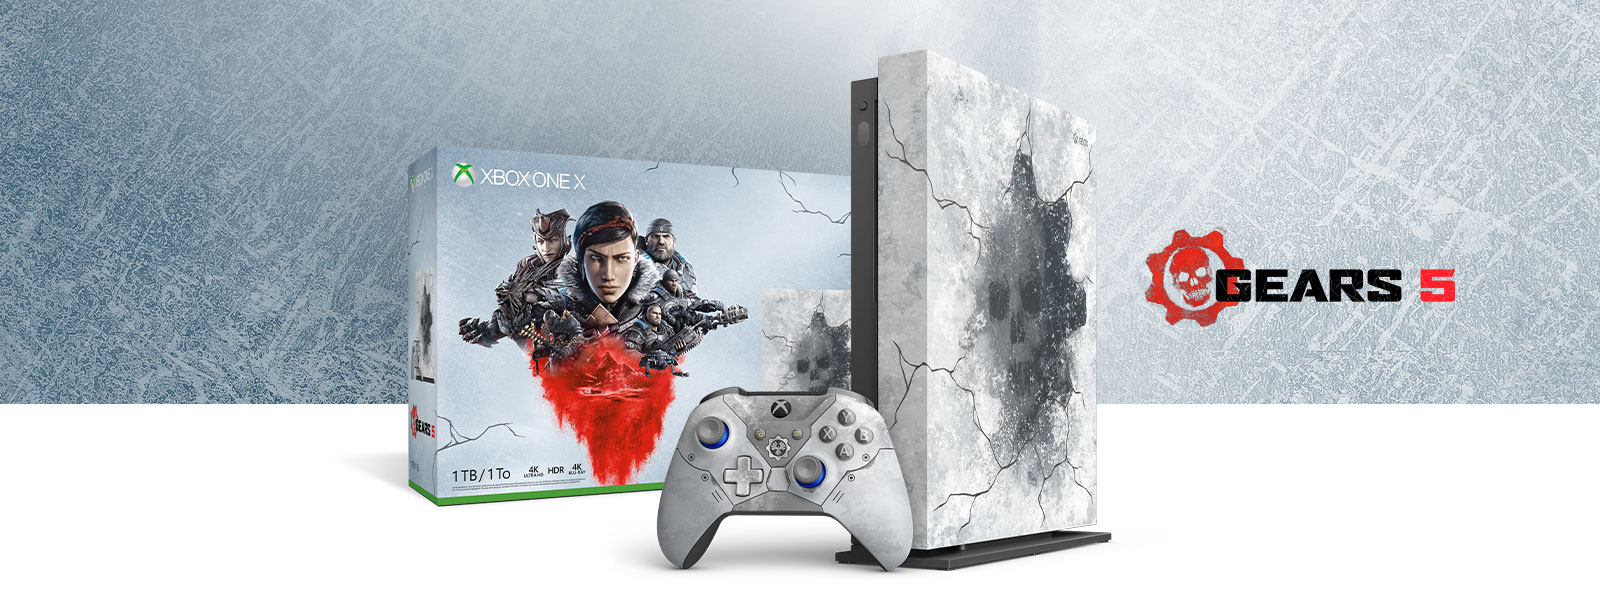 xbox one s with gears 5